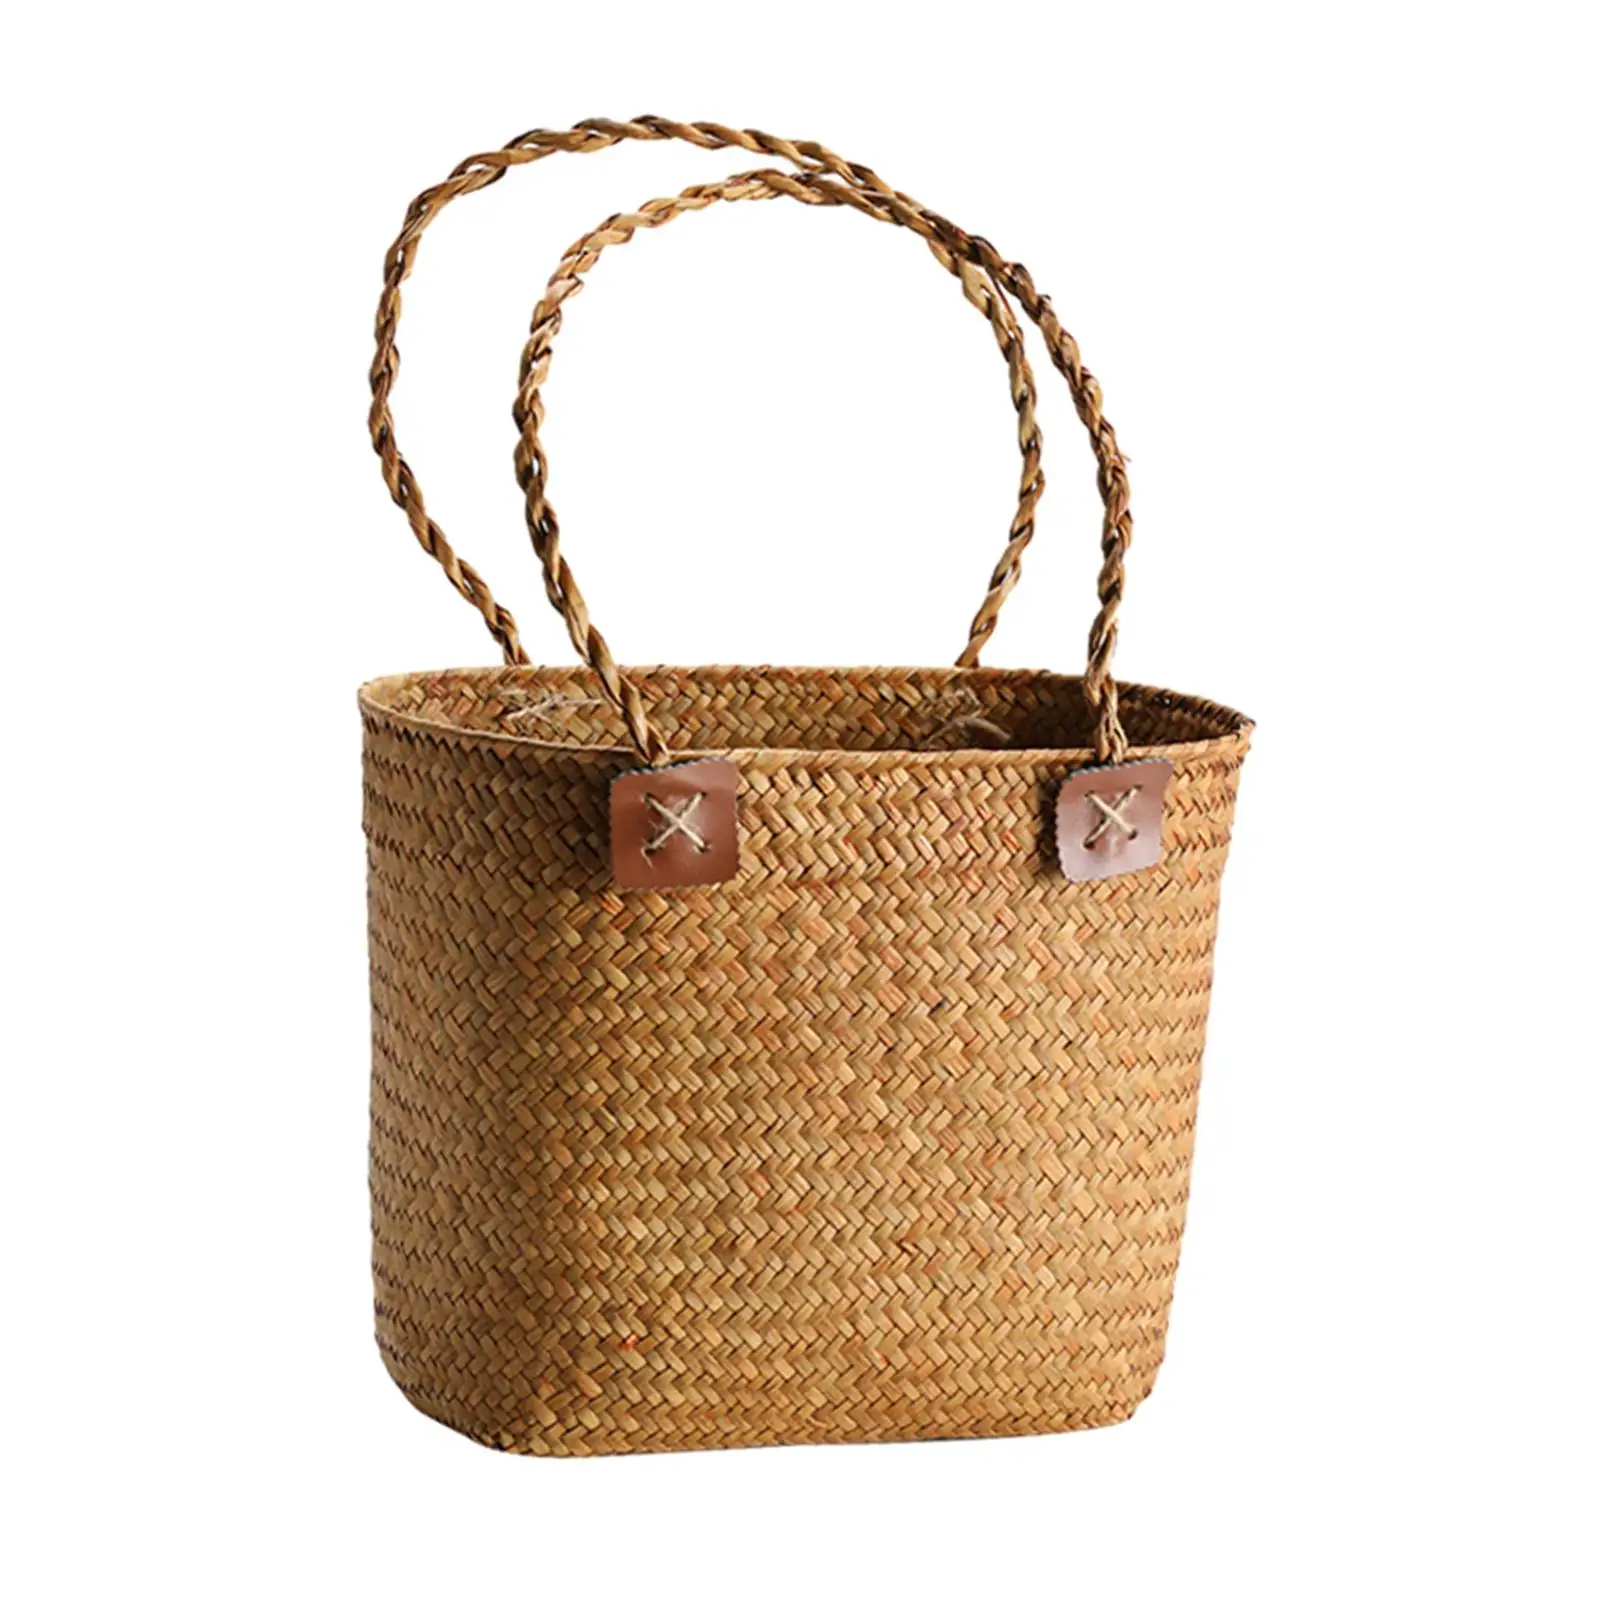 Handwoven Storage Basket, Shopping Grocery Bag Container, Double Handles Lightweight Picnic Basket, Grocery Baskets